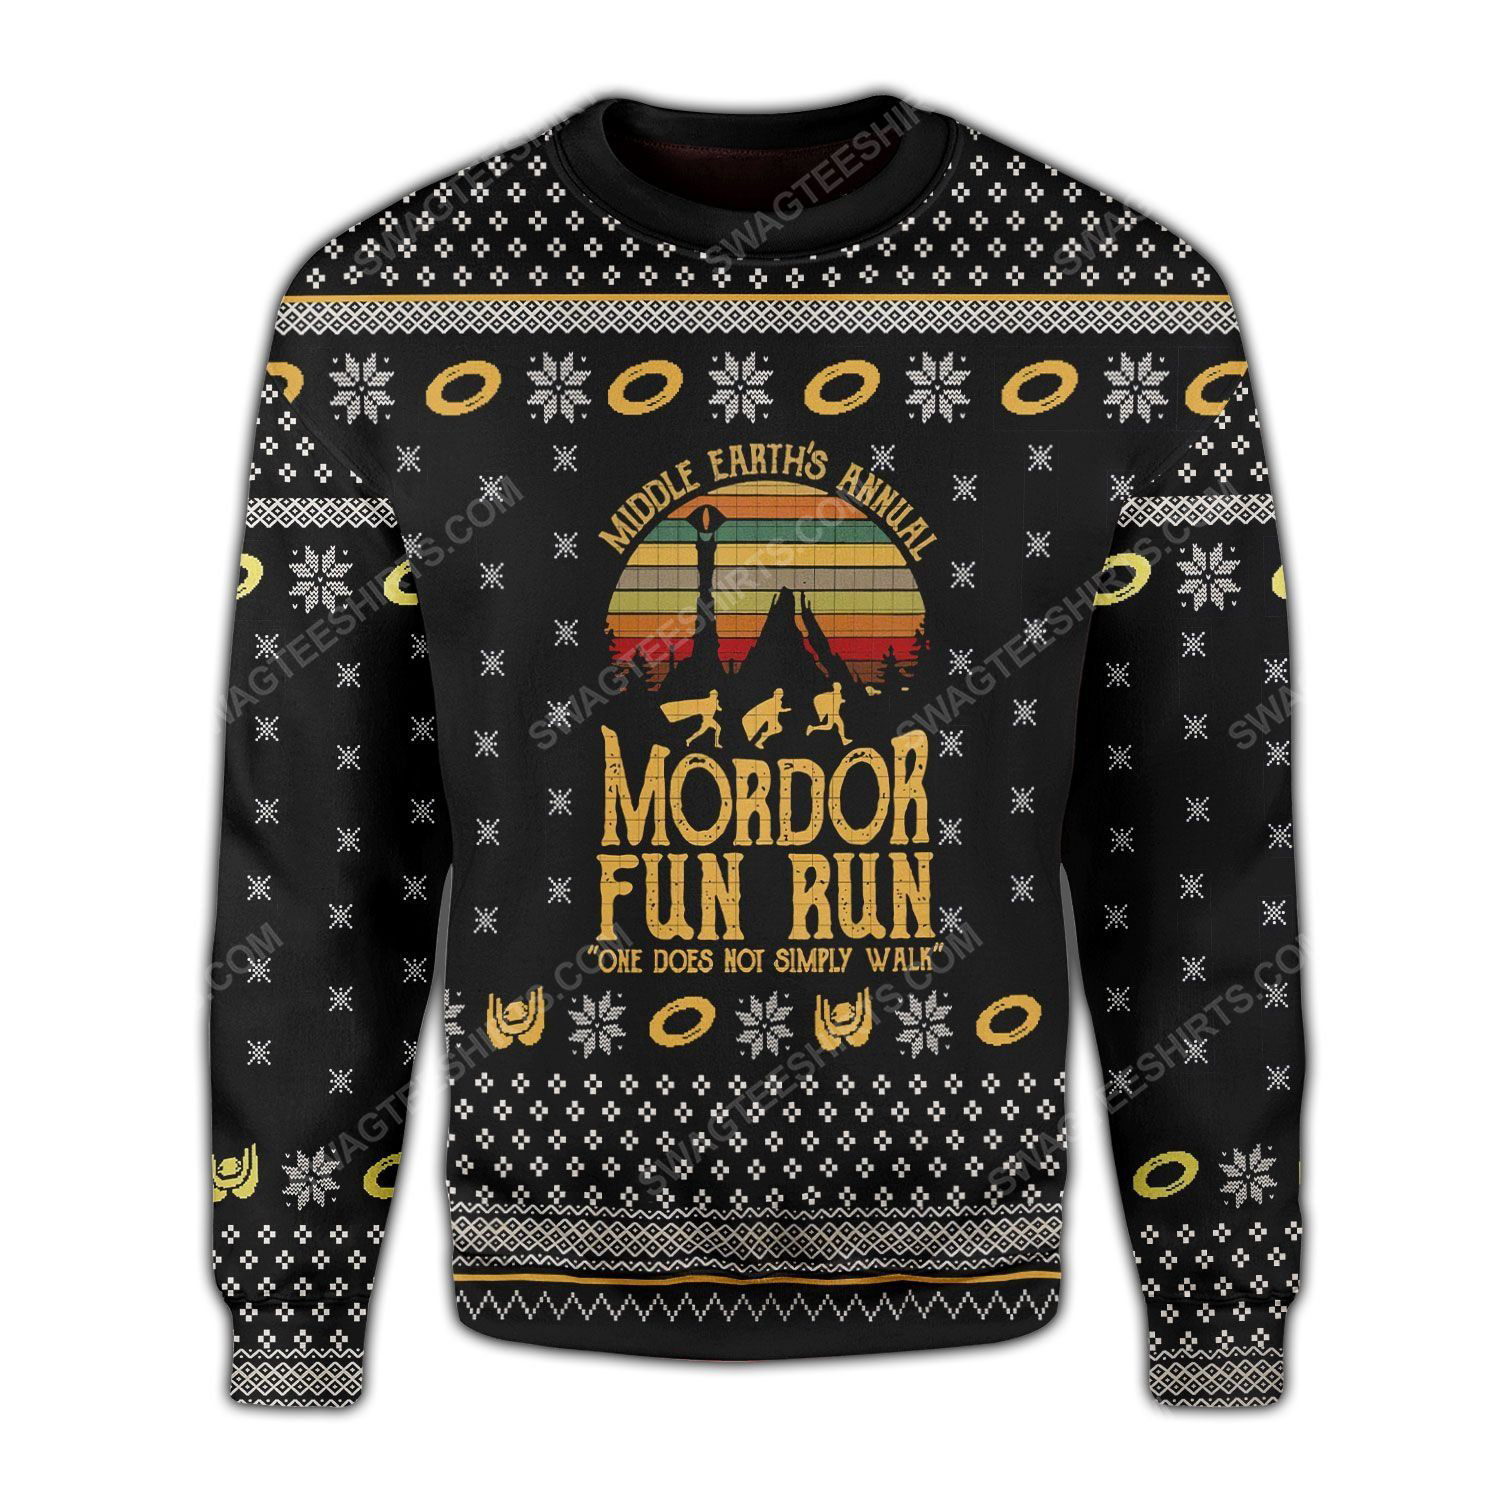 Mordor fun run the lord of the rings ugly christmas sweater - Copy (2)